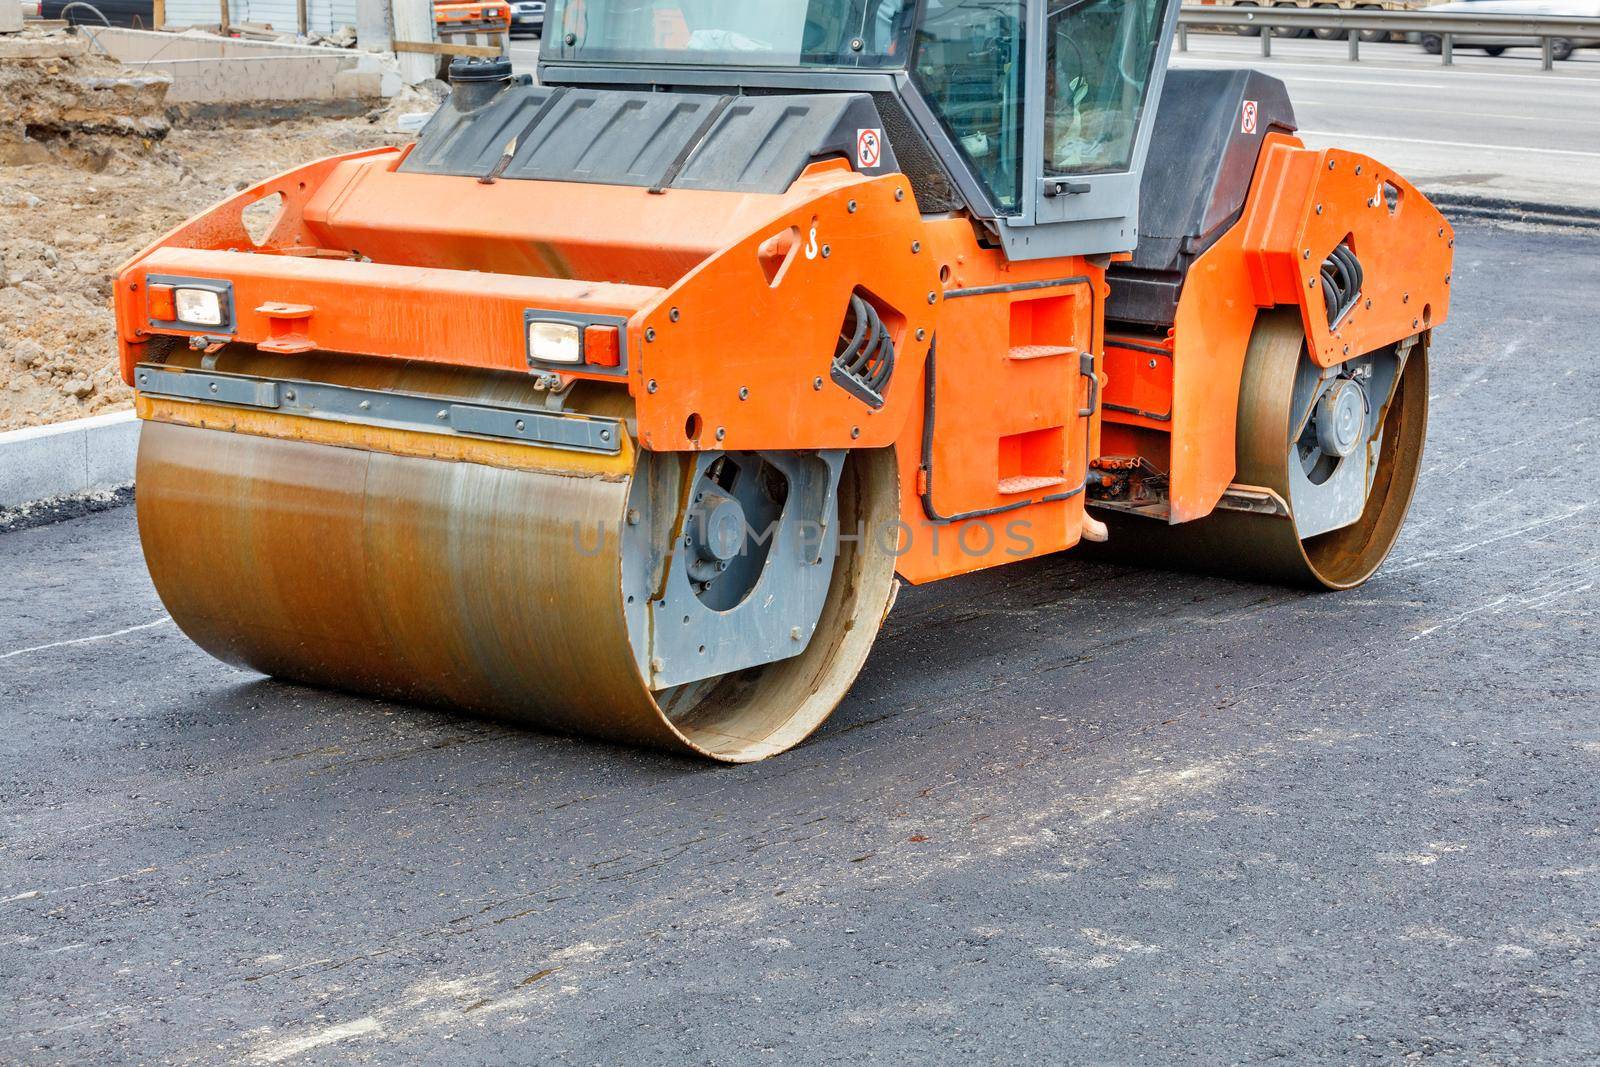 The large vibratory road roller compacts fresh asphalt on a new road. by Sergii